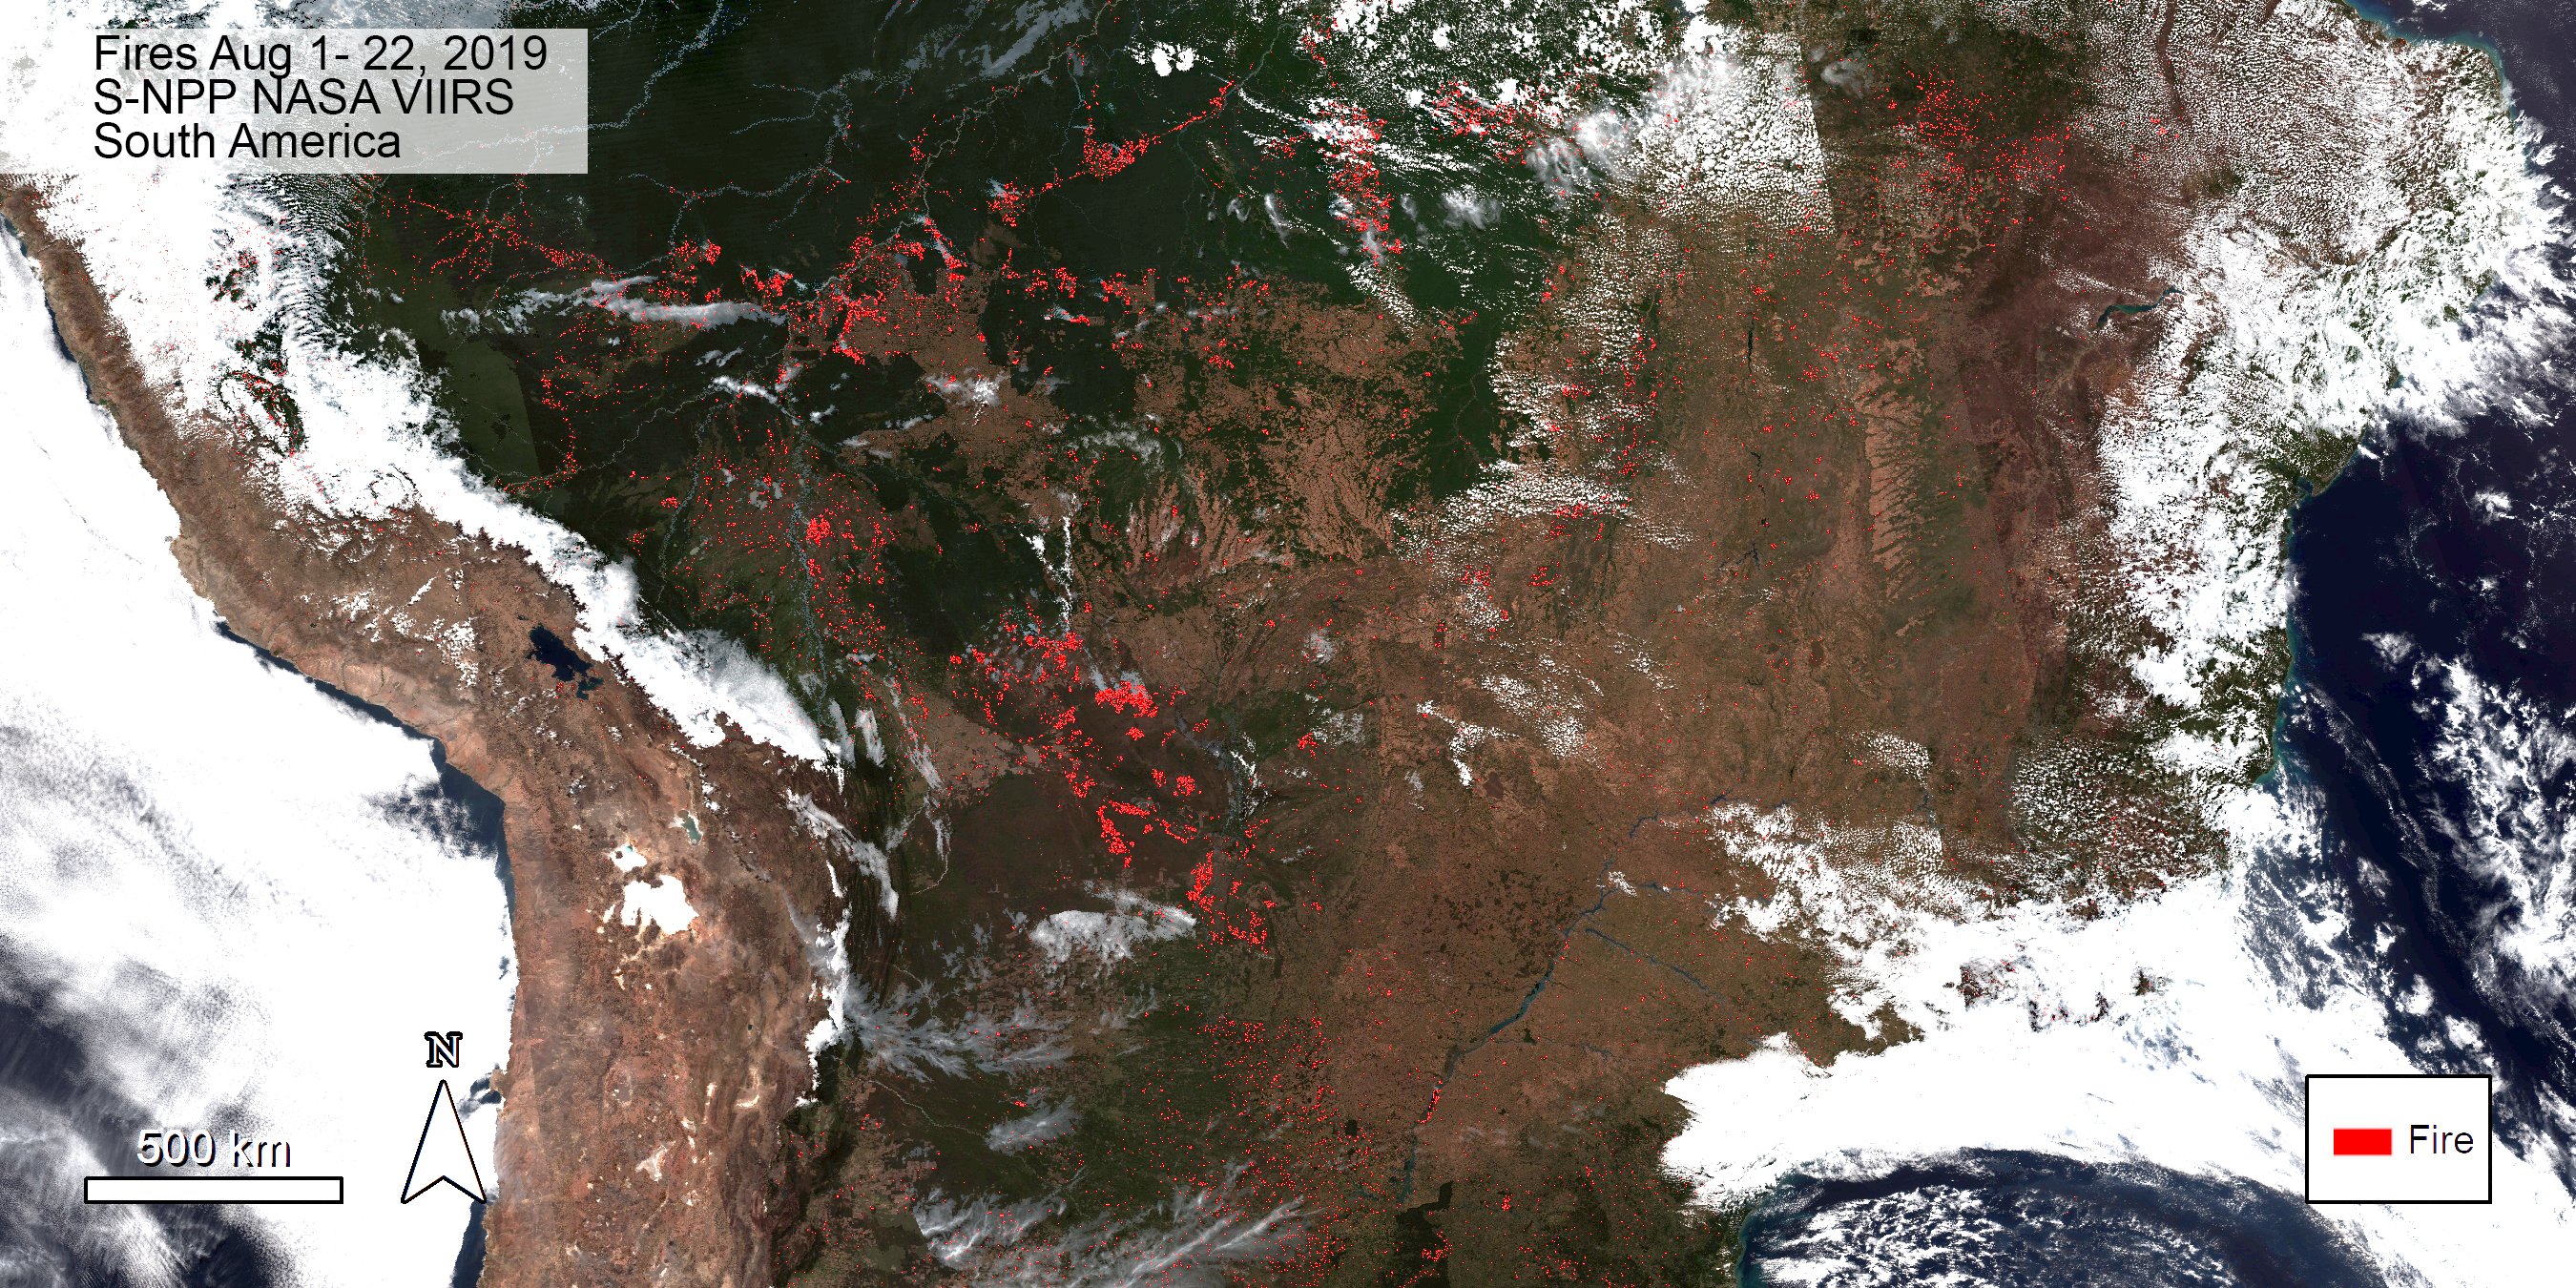 Red dots indicating fires across the Amazon Rainforest.